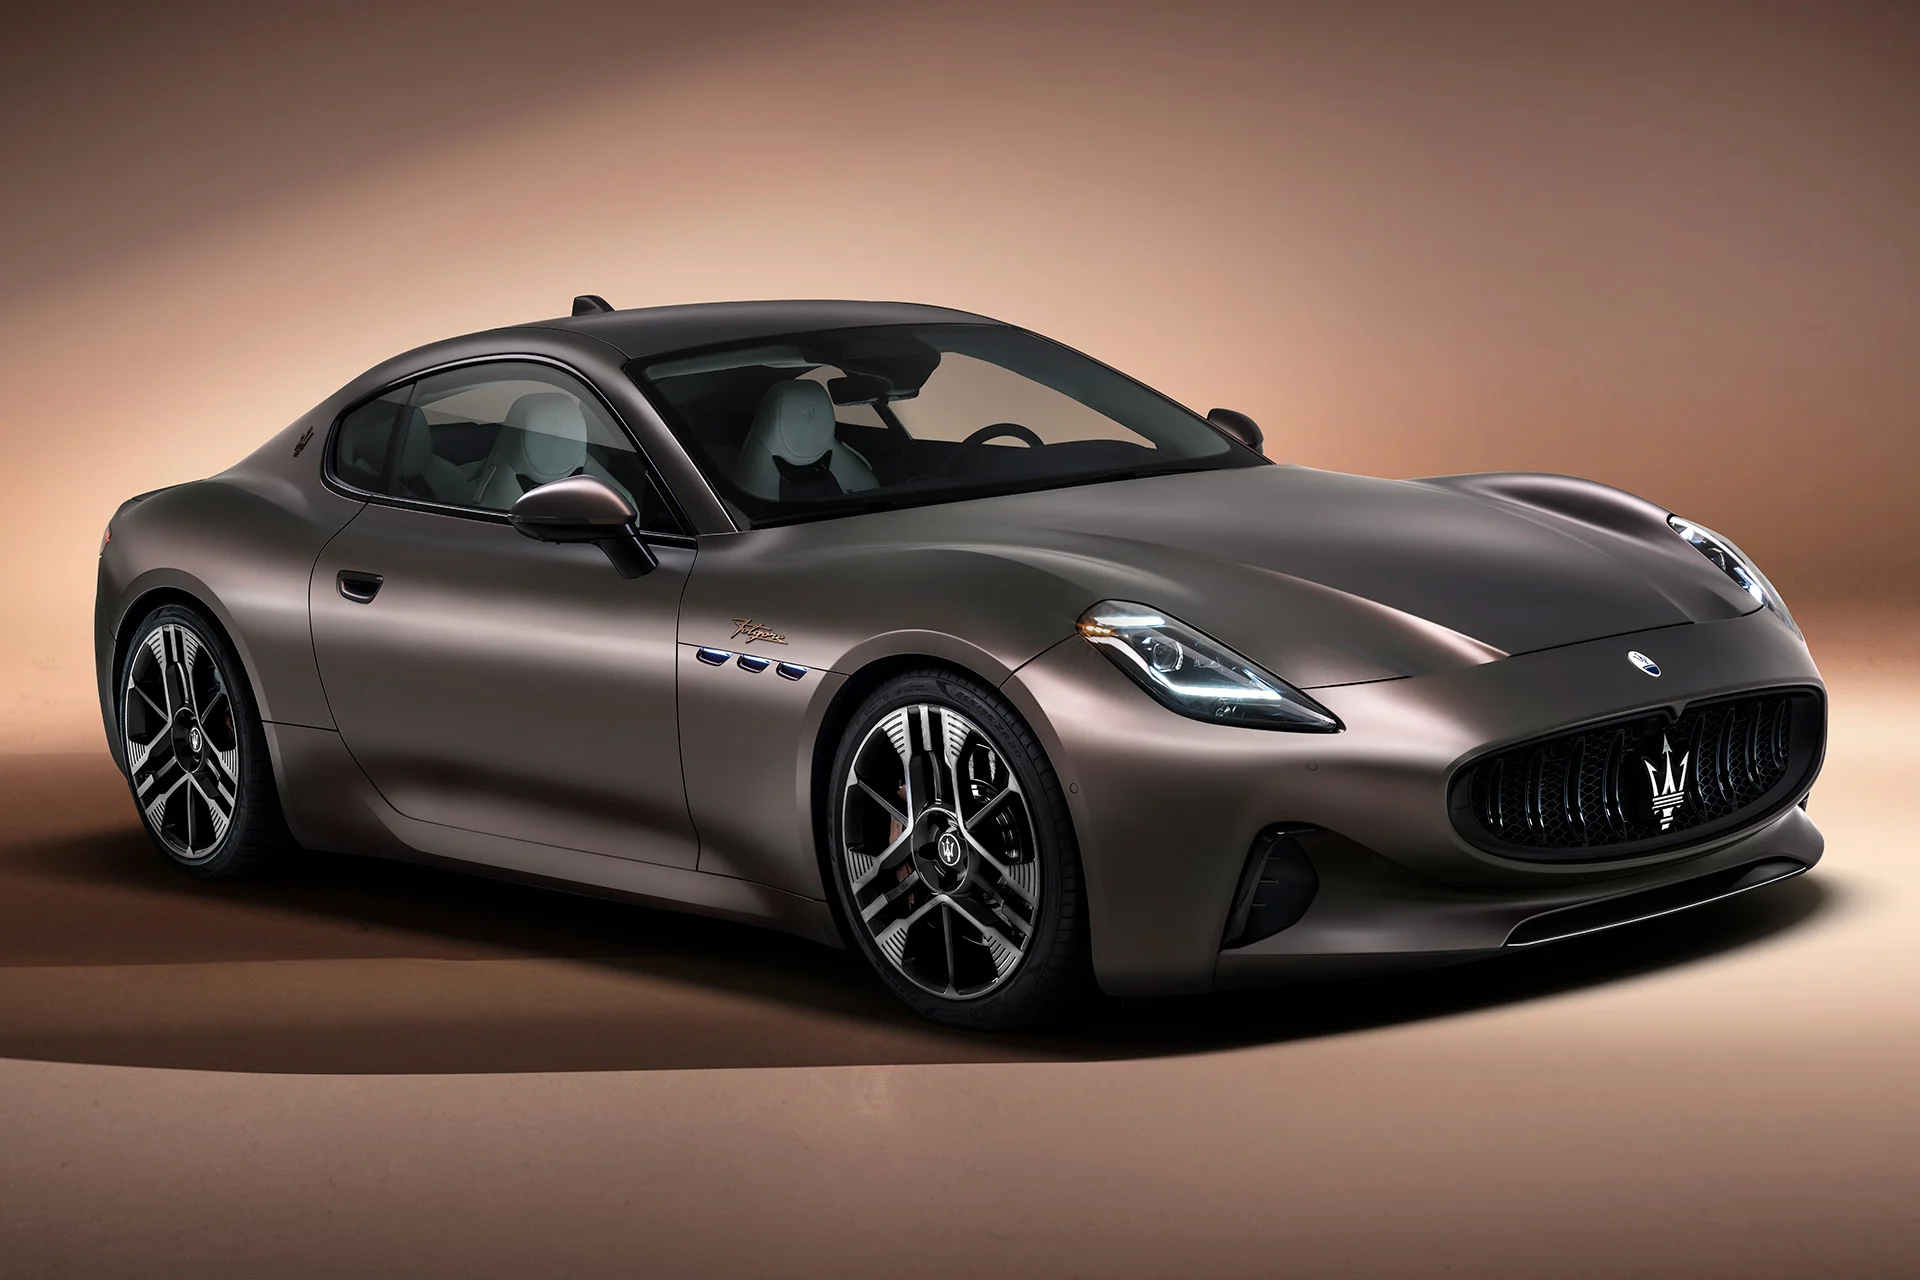 Maserati has announced its first electric car, the GranTurismo Folgore, a coupe with a 1,221 HP engine, up to 320 km/h speed and price from $170,000